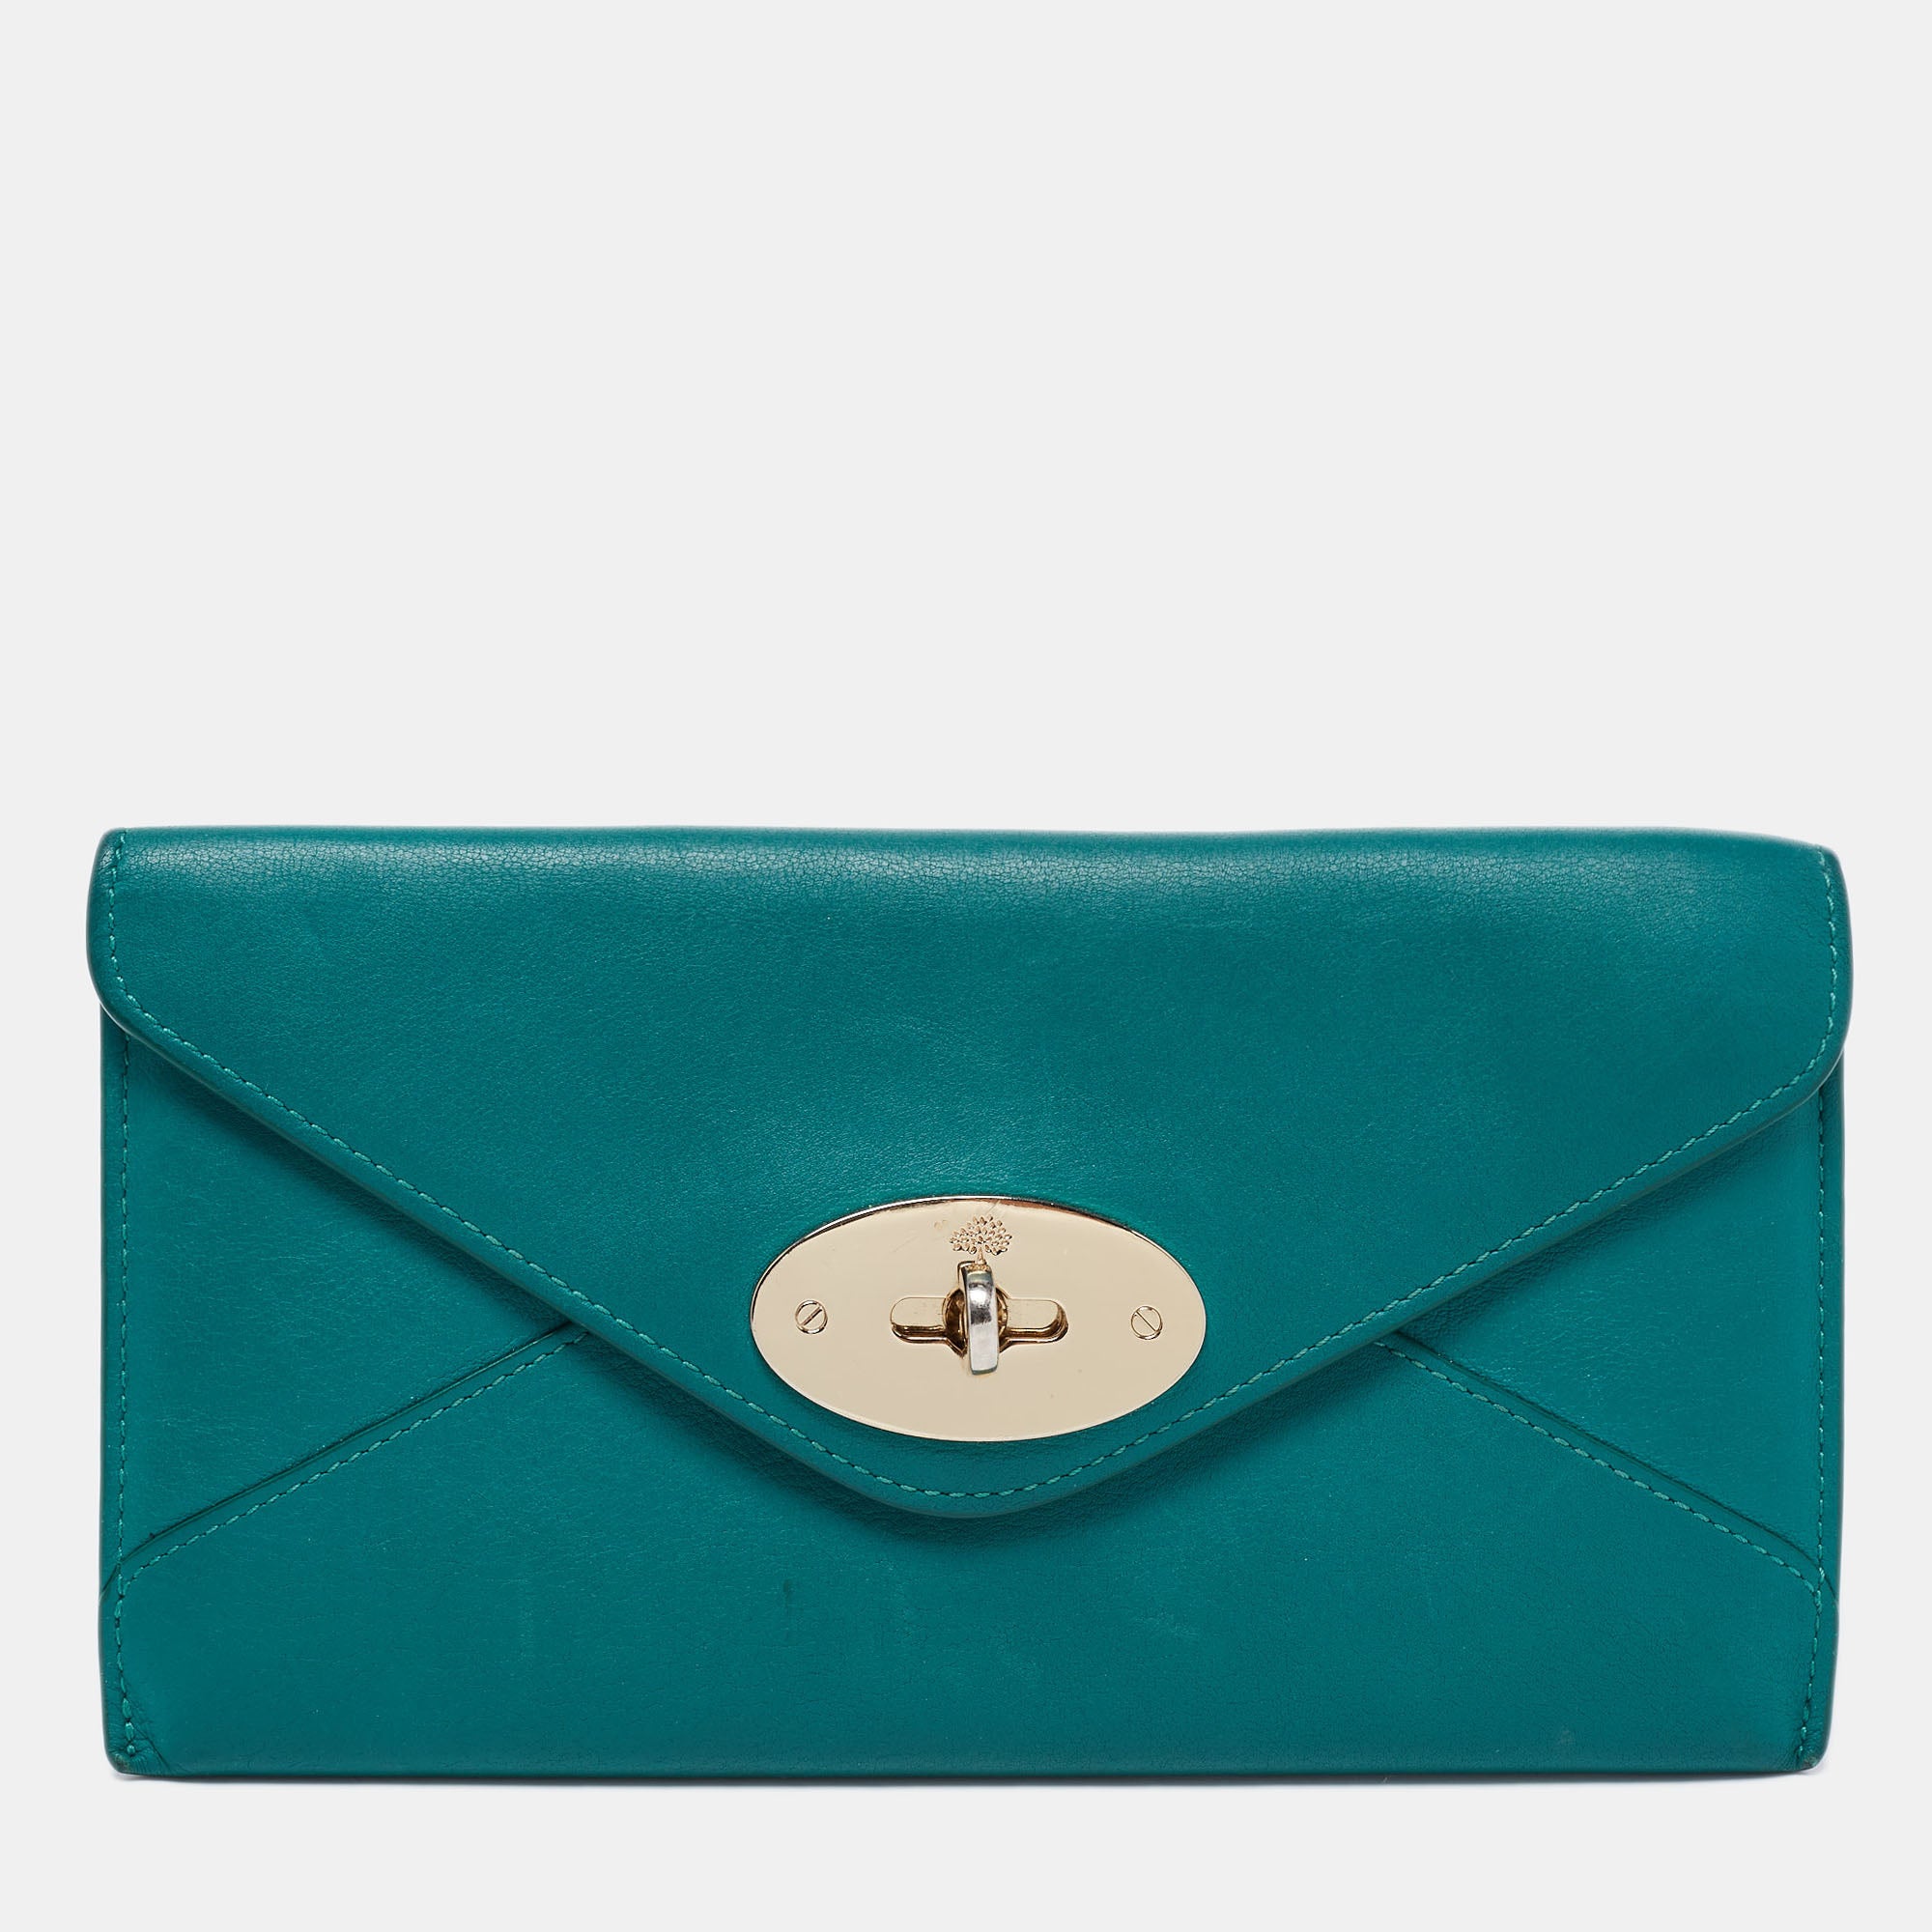 Mulberry Green Handbags on Sale | ShopStyle